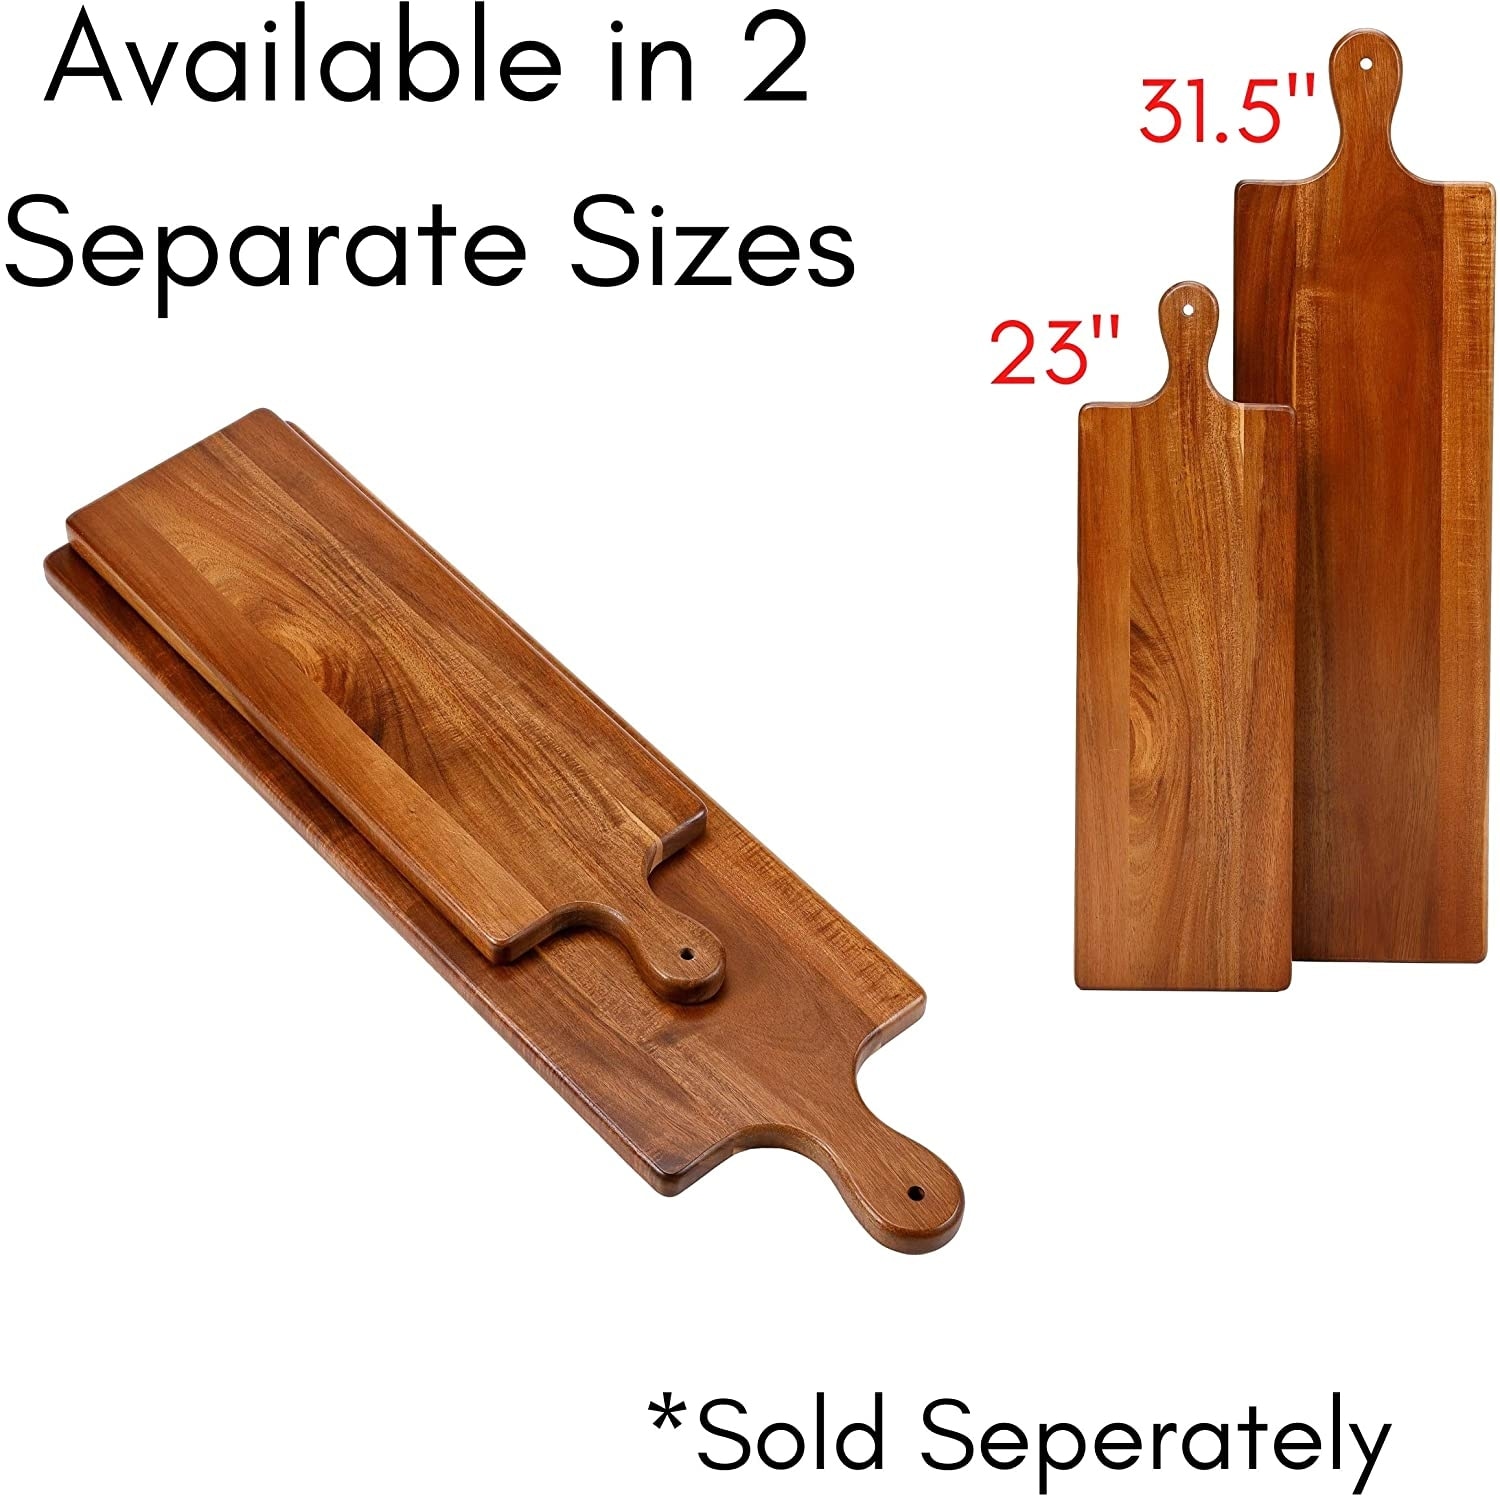  36 Large Charcuterie Board with Handles - Extra Long Wooden  Serving Cheese Boards - Serving Platter for Meat, Party Appetizers, Outdoor  & Fruits Display (Acacia Wood) : Home & Kitchen